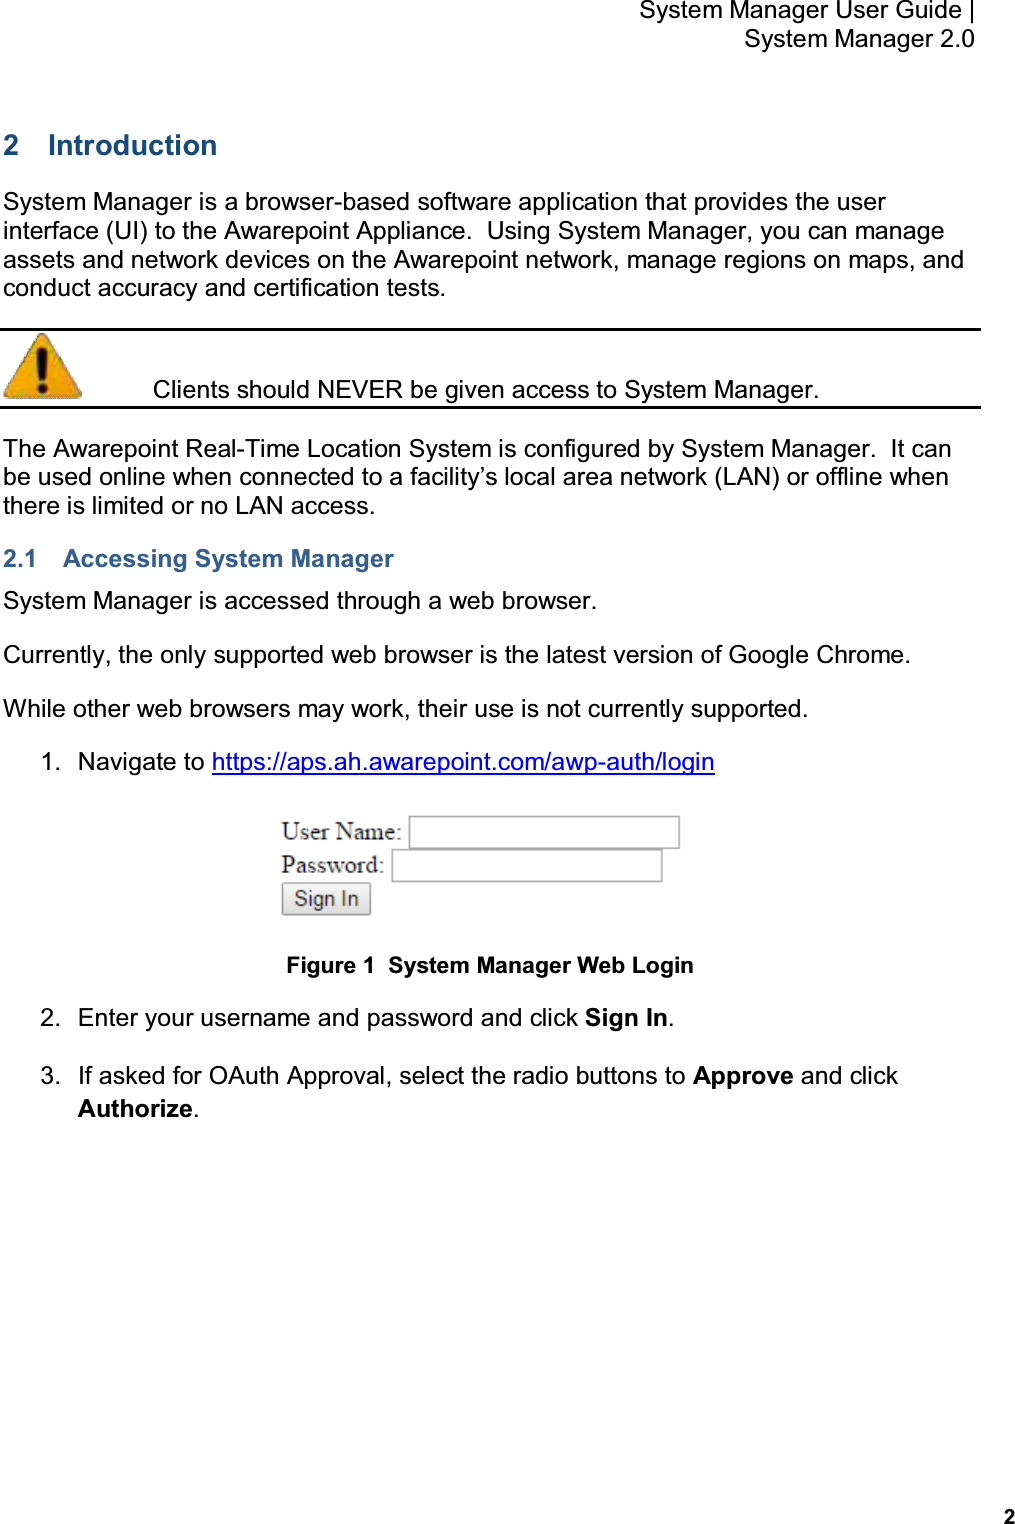           2 System Manager User Guide |  System Manager 2.0 2  Introduction System Manager is a browser-based software application that provides the user interface (UI) to the Awarepoint Appliance.  Using System Manager, you can manage assets and network devices on the Awarepoint network, manage regions on maps, and conduct accuracy and certification tests.   Clients should NEVER be given access to System Manager. The Awarepoint Real-Time Location System is configured by System Manager.  It can be used online when connected to a facility’s local area network (LAN) or offline when there is limited or no LAN access. 2.1  Accessing System Manager System Manager is accessed through a web browser.   Currently, the only supported web browser is the latest version of Google Chrome. While other web browsers may work, their use is not currently supported. 1.  Navigate to https://aps.ah.awarepoint.com/awp-auth/login  Figure 1  System Manager Web Login 2.  Enter your username and password and click Sign In. 3.  If asked for OAuth Approval, select the radio buttons to Approve and click Authorize. 